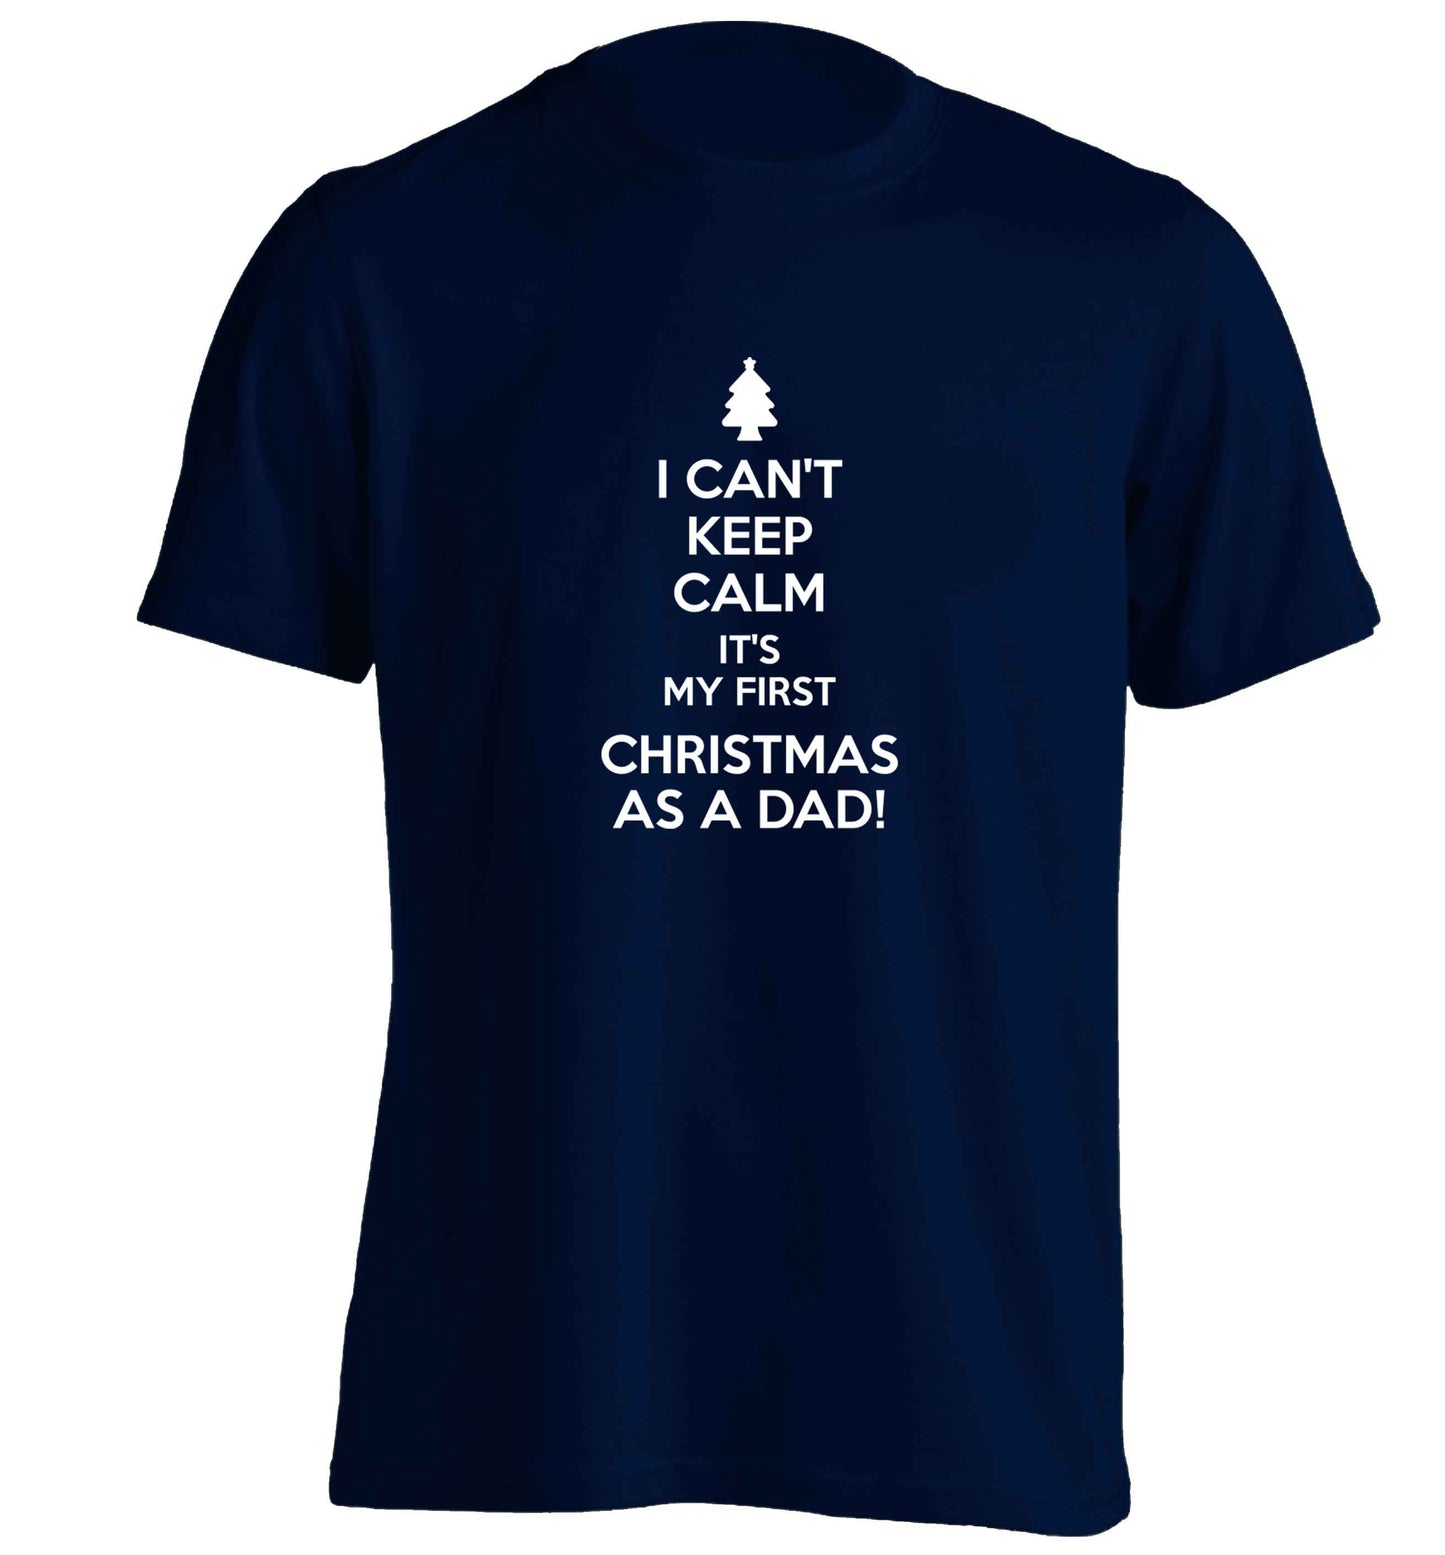 I can't keep calm it's my first Christmas as a dad adults unisex navy Tshirt 2XL